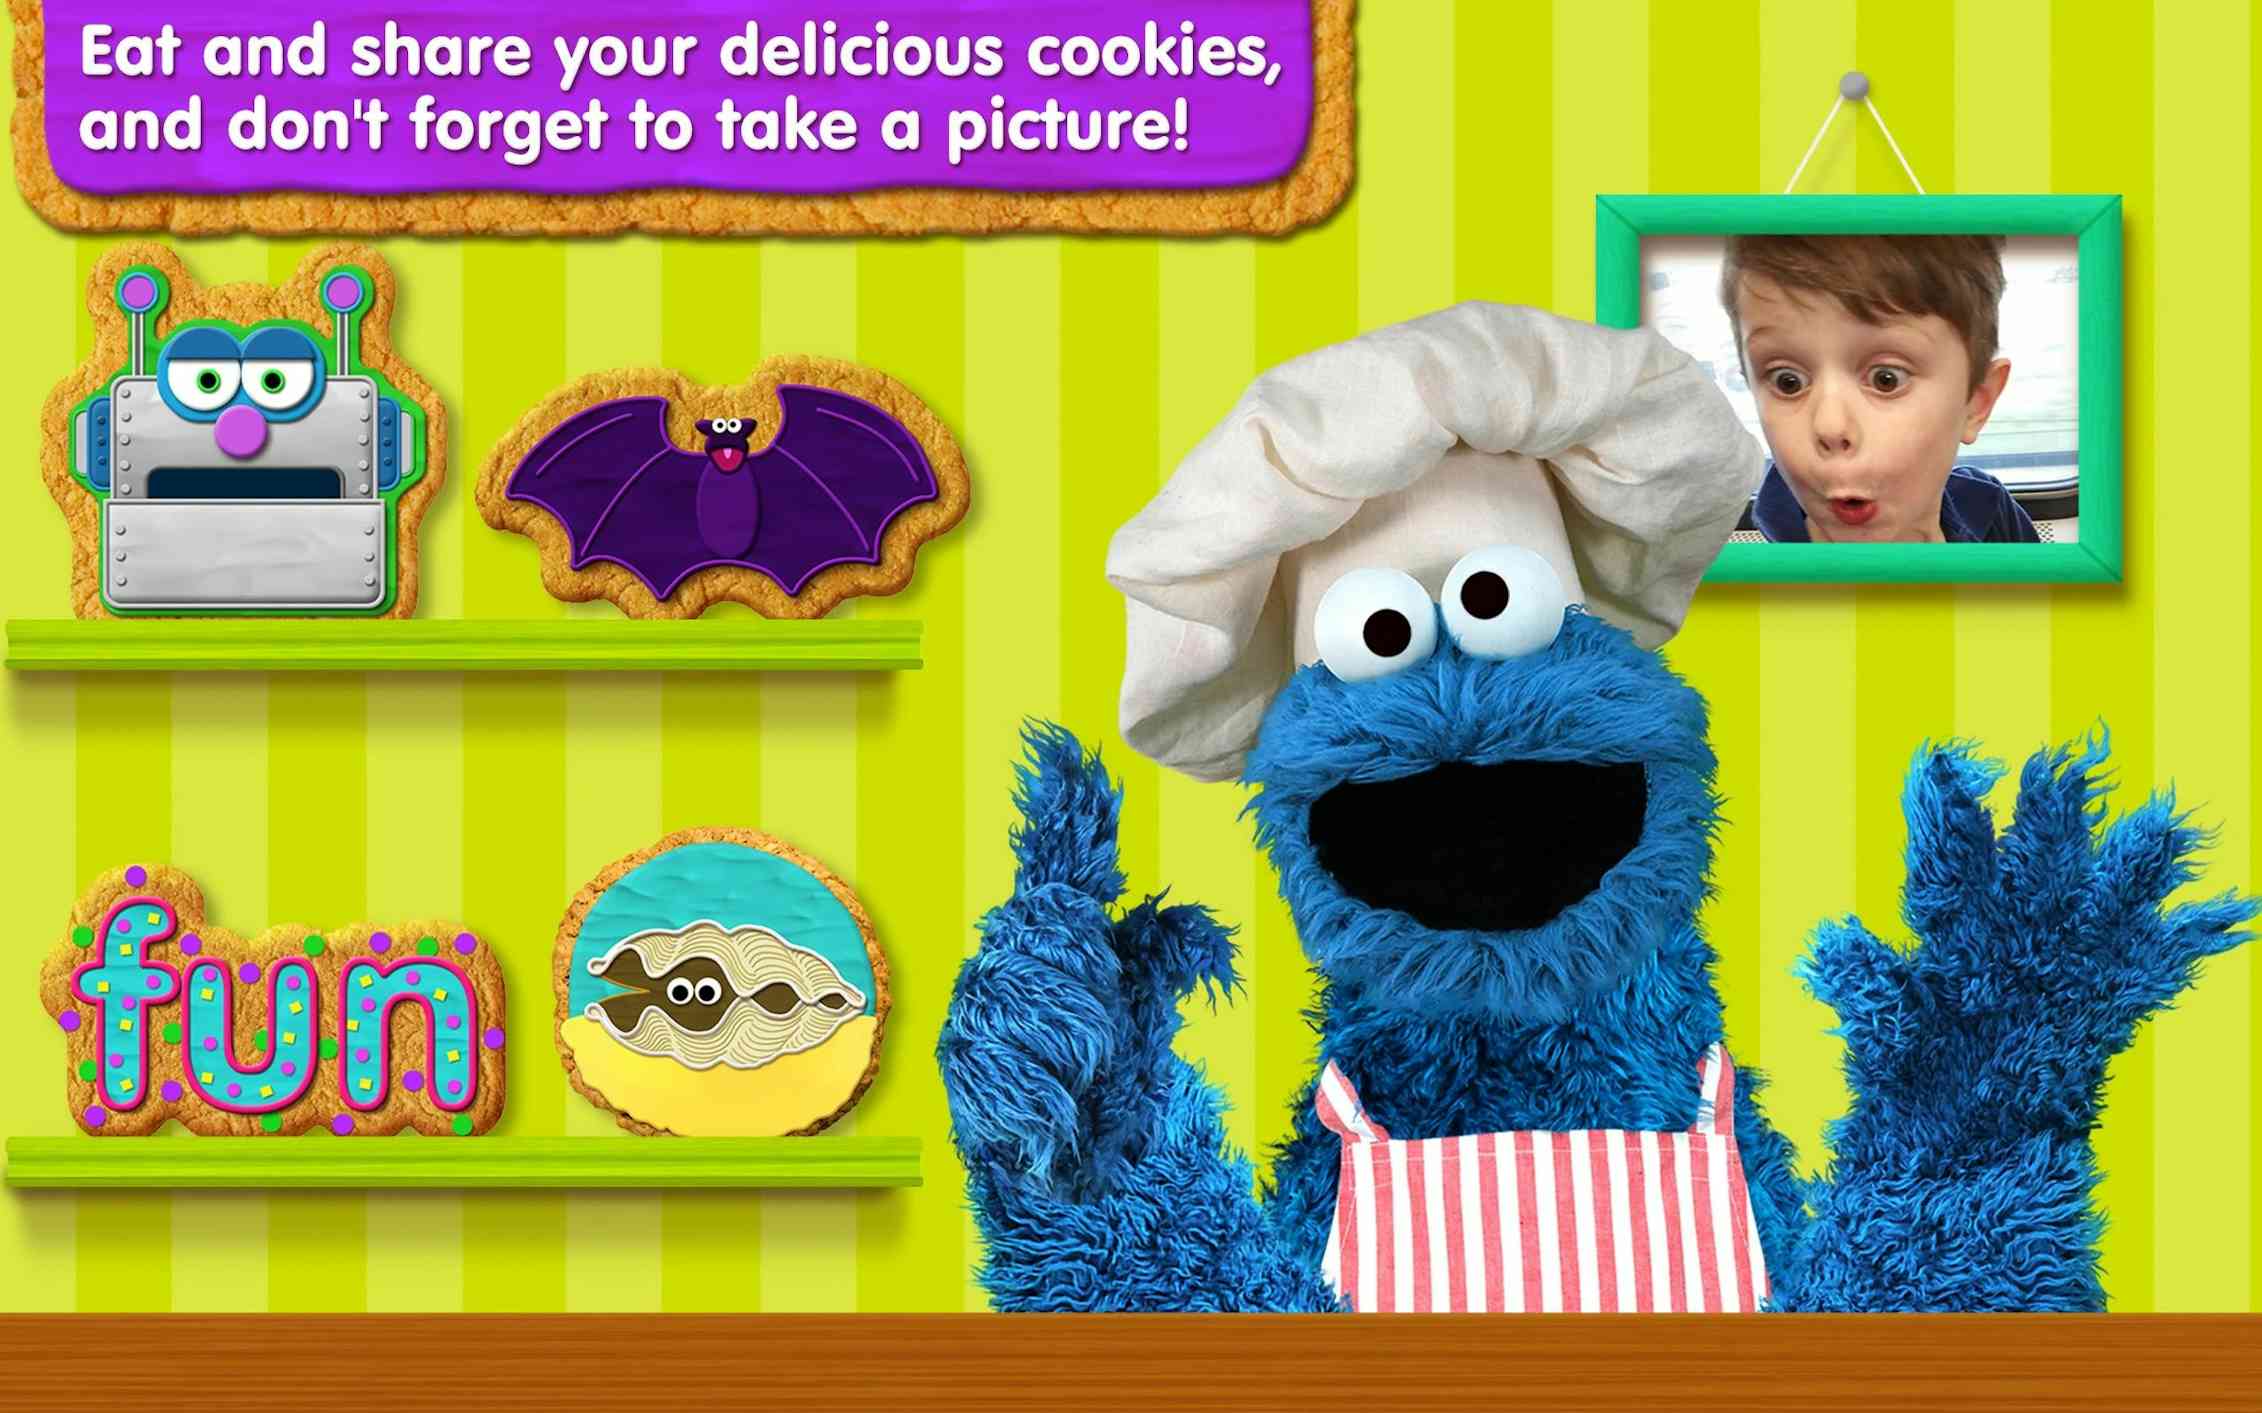 Sesame Street's Cookie Monster holds up 7 fingers, next to some cookies and a surprised child in the background.